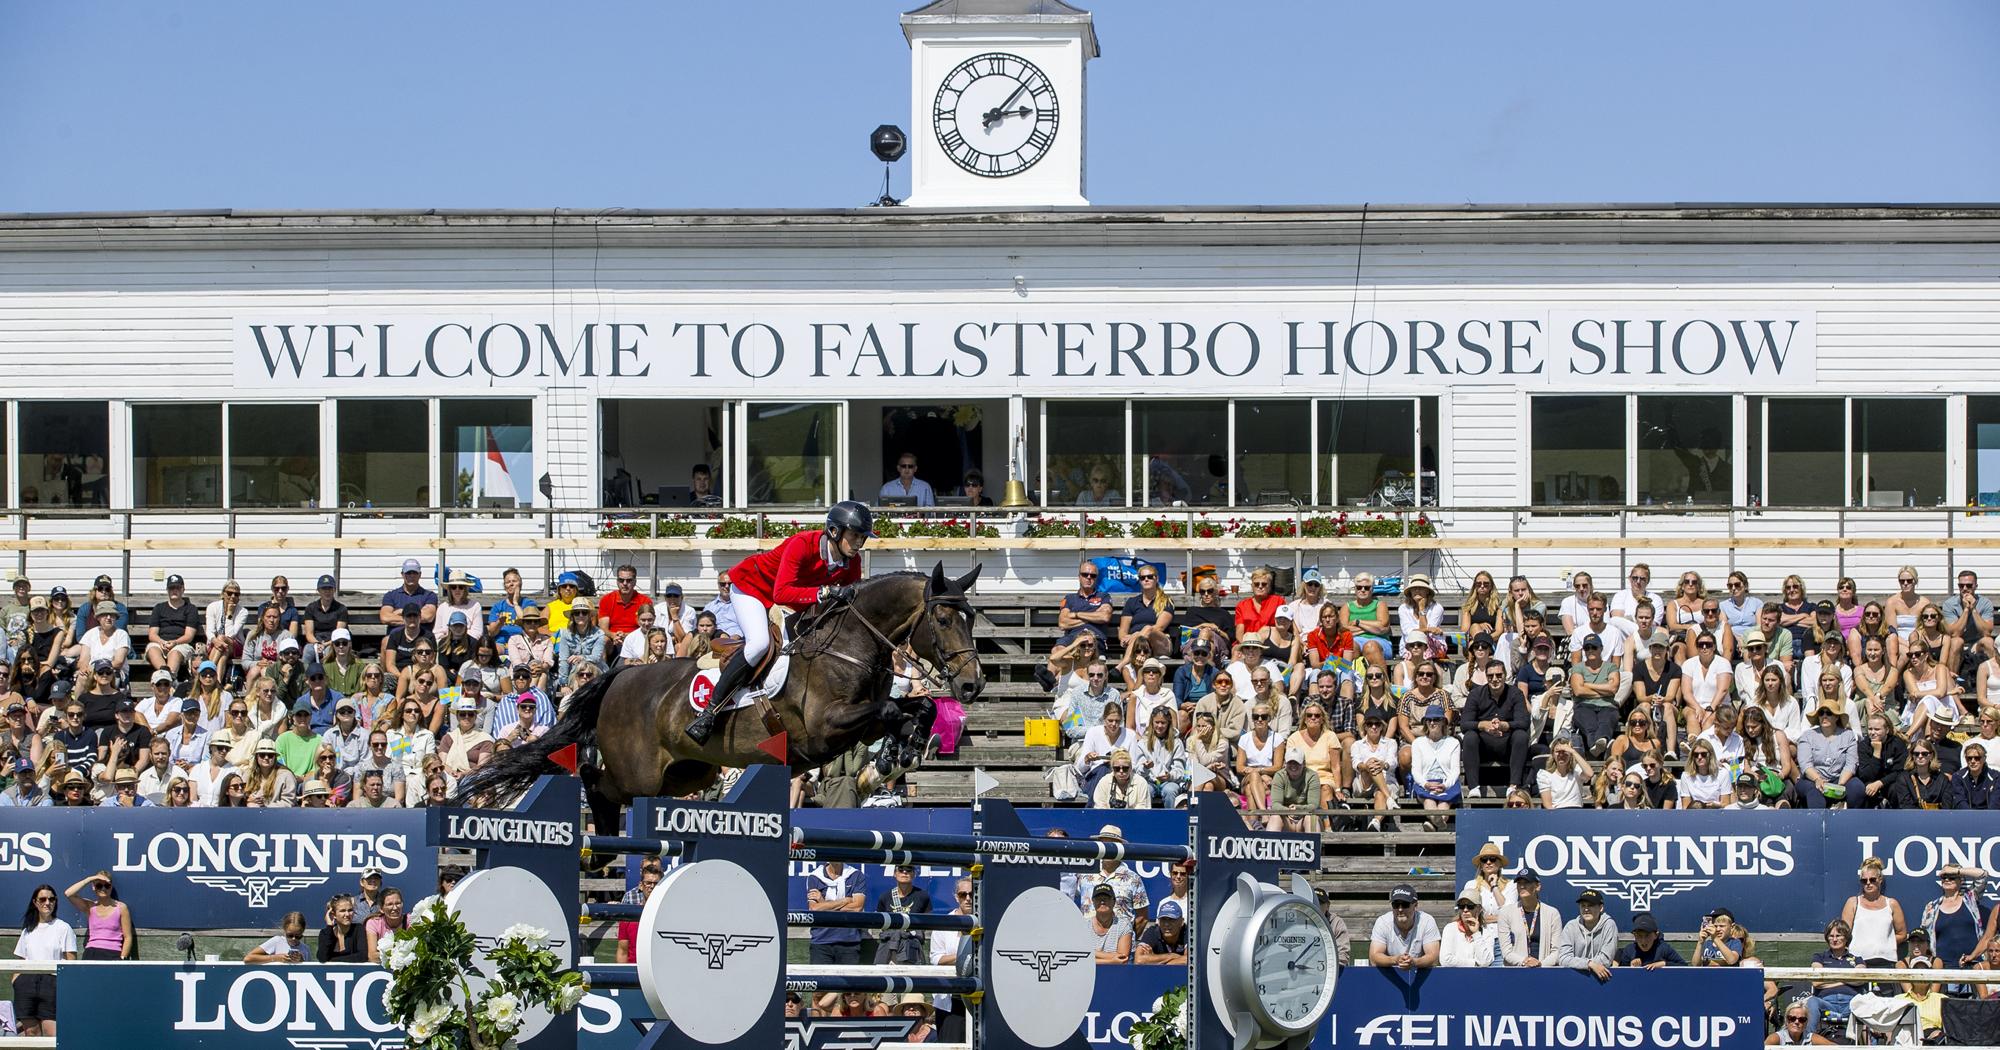 Martin Fuchs and Conner Jei add victory of Longines Grand Prix Falsterbo to their record